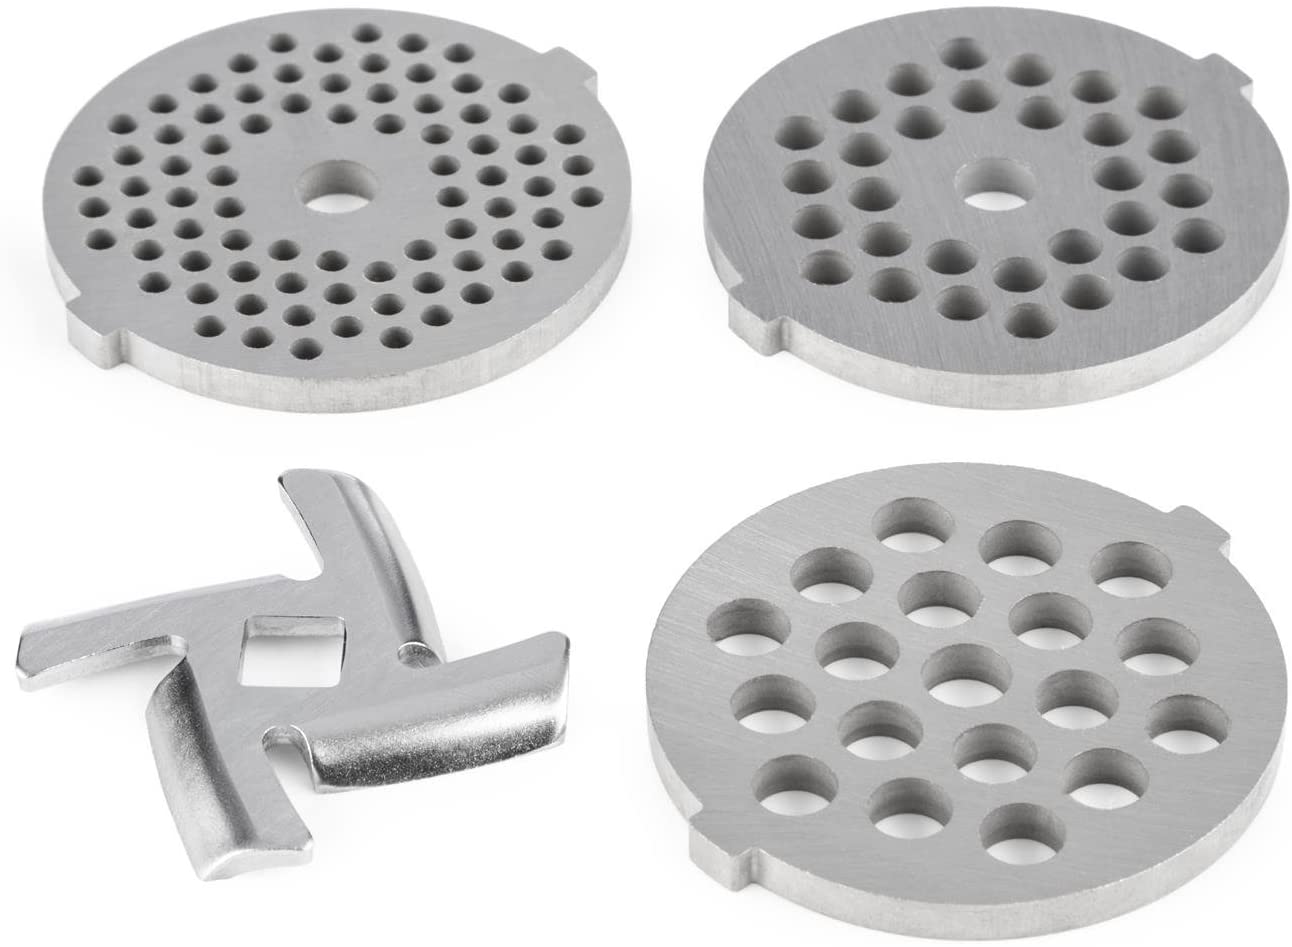 Klarstein; 4 Piece; Hole Discs Set 3/4.5/7 mm; Replacement Stainless Steel Stainless Steel Cross Blade • For Lucia Kitchen Machine Mincer Easy to Clean No Rust möglich; Dishwasher Safe; Total Weight of approximately 130 g